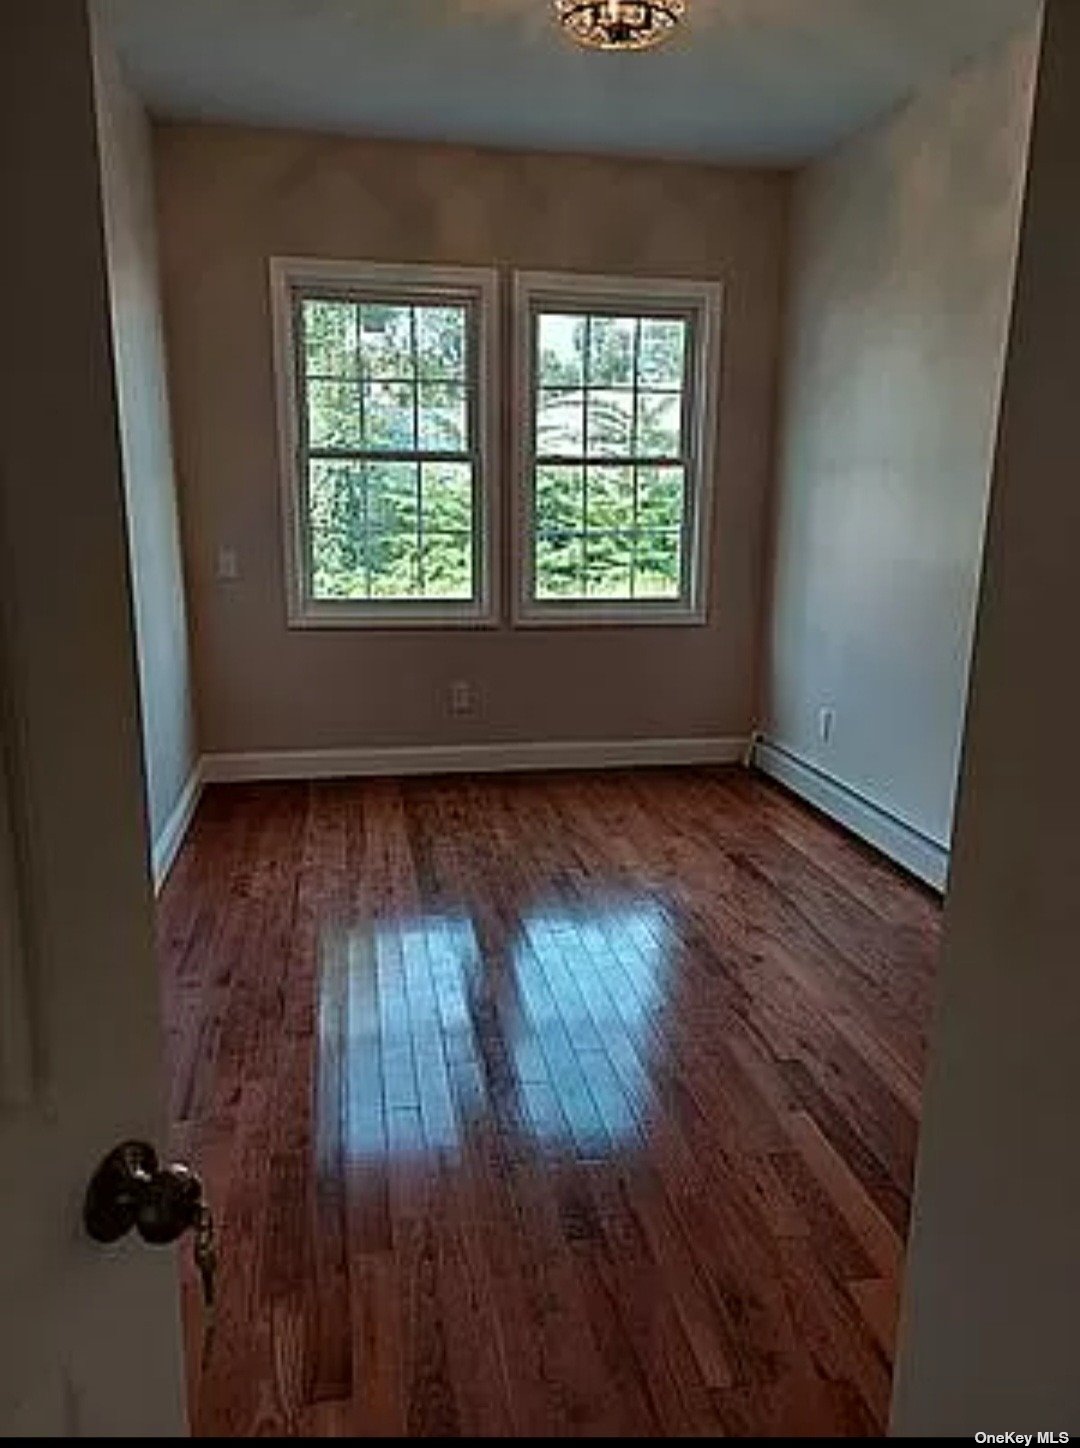 an empty room with wooden floor cabinet and windows